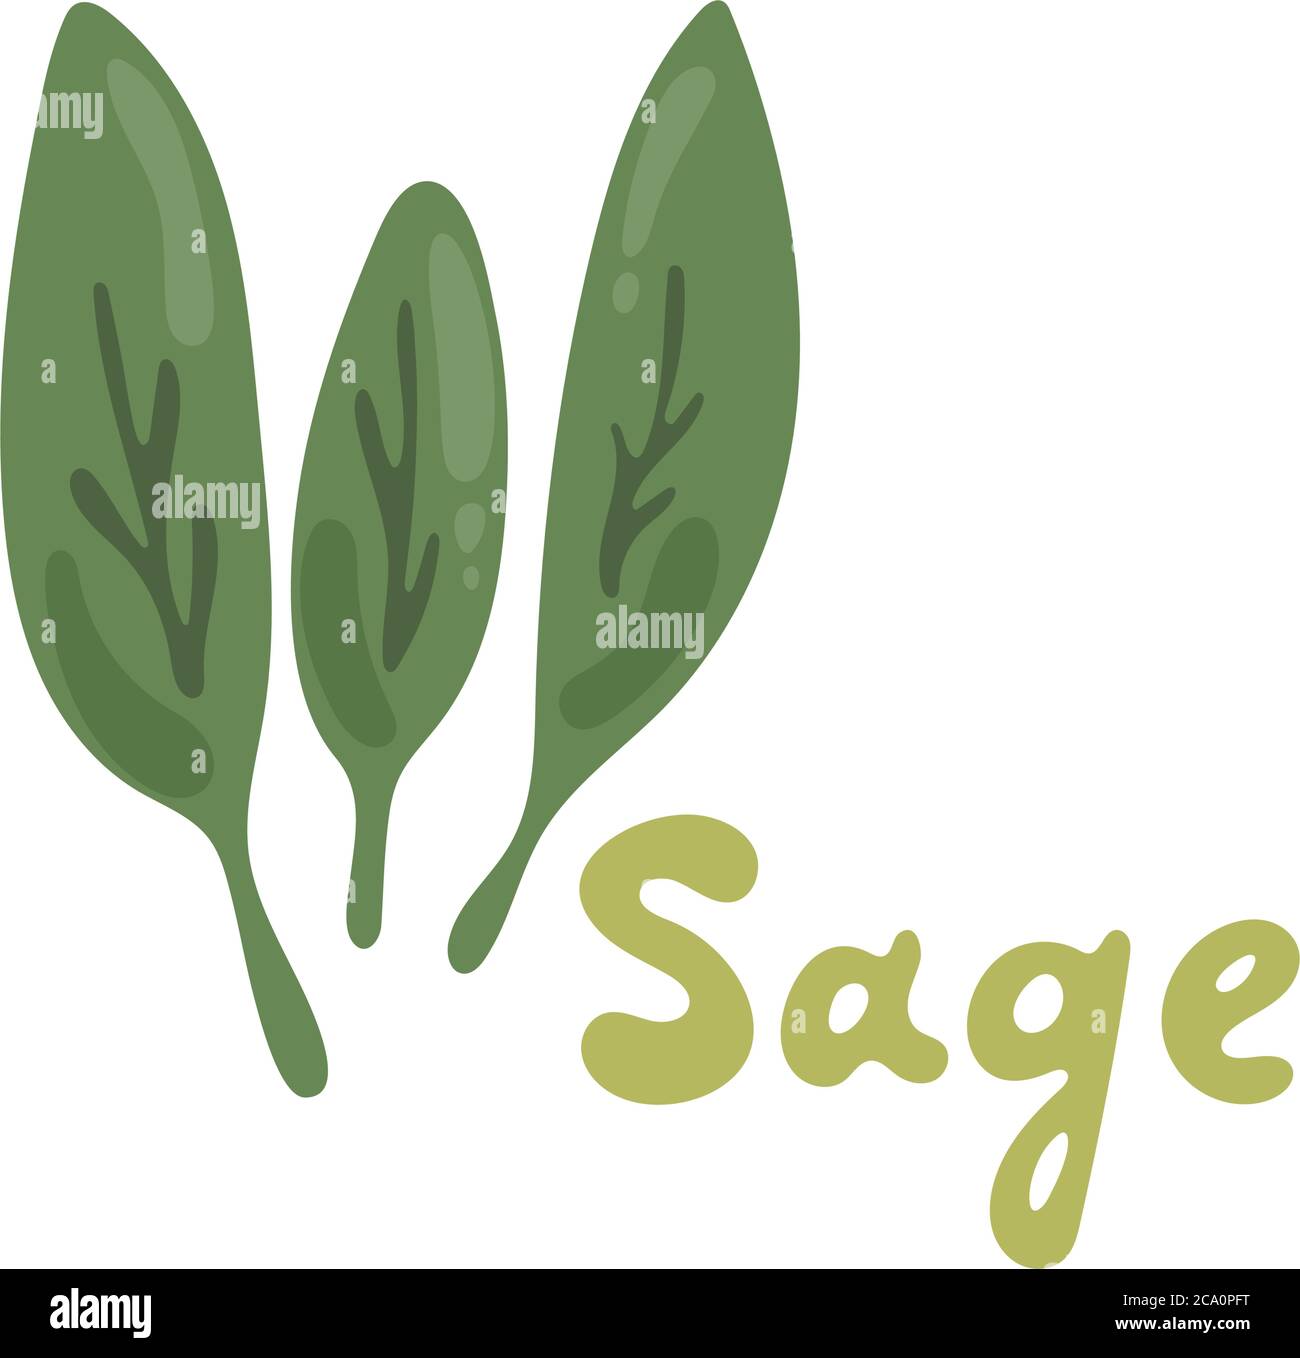 Sage herb, food vector illustration, logo. Sage plant isolated on white background. Medicinal plant leaves. Salvia officinalis plant also called sage Stock Vector